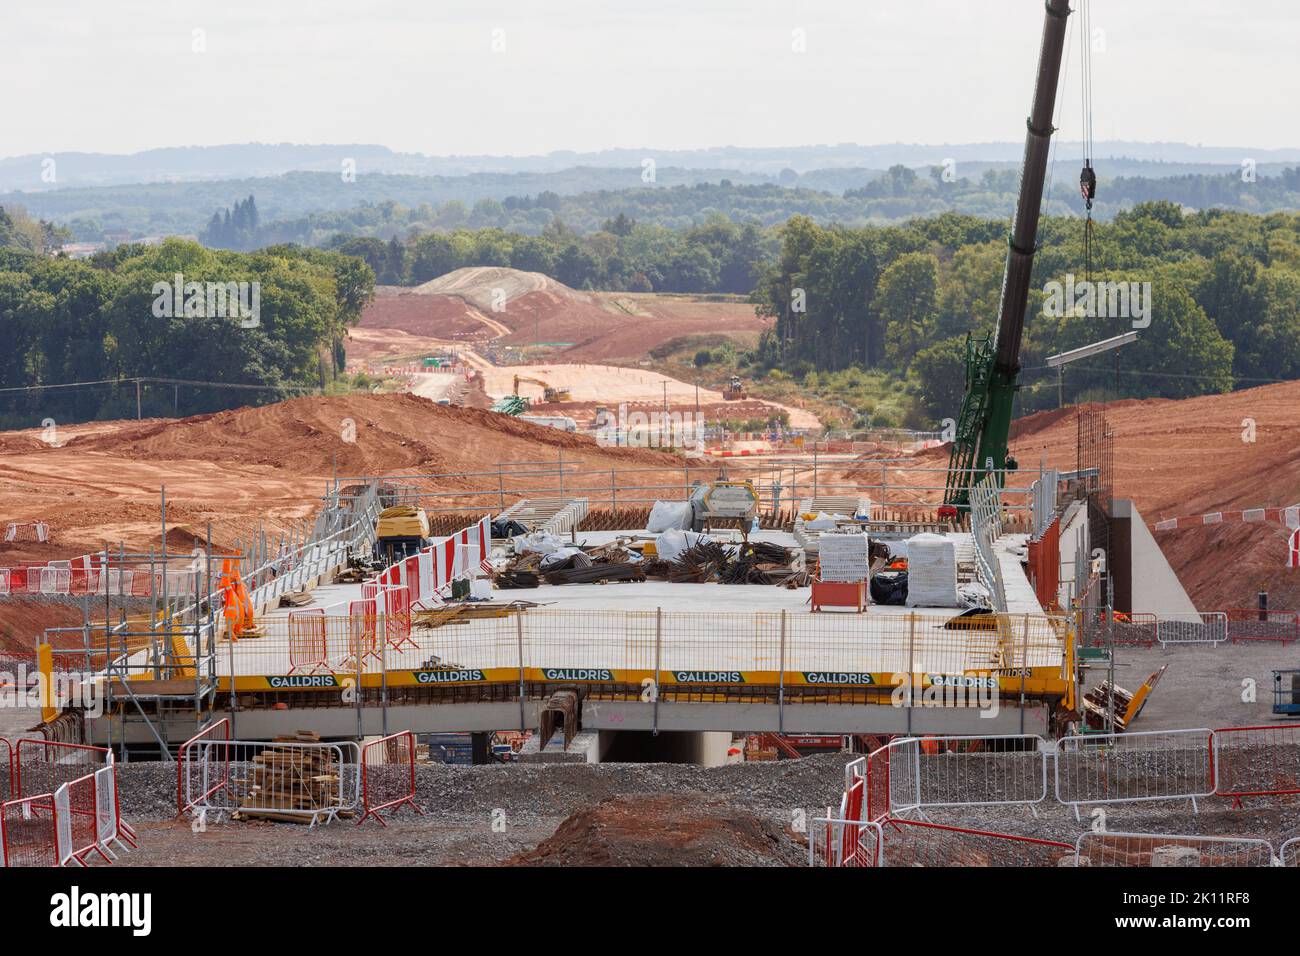 The section of the HS2 rail network being built near Burton Green in Warwickshire. The line goes through the centre of Burton Green, going under Cromwell Lane via a tunnel. The tunnel is called a cut and shut, constructed by making the sides and then adding a top covering layer to form the tunnel. Picture shows the view from Cromwell Lane looking towards Kenilworth after part of the tunnel construction has been completed. Stock Photo